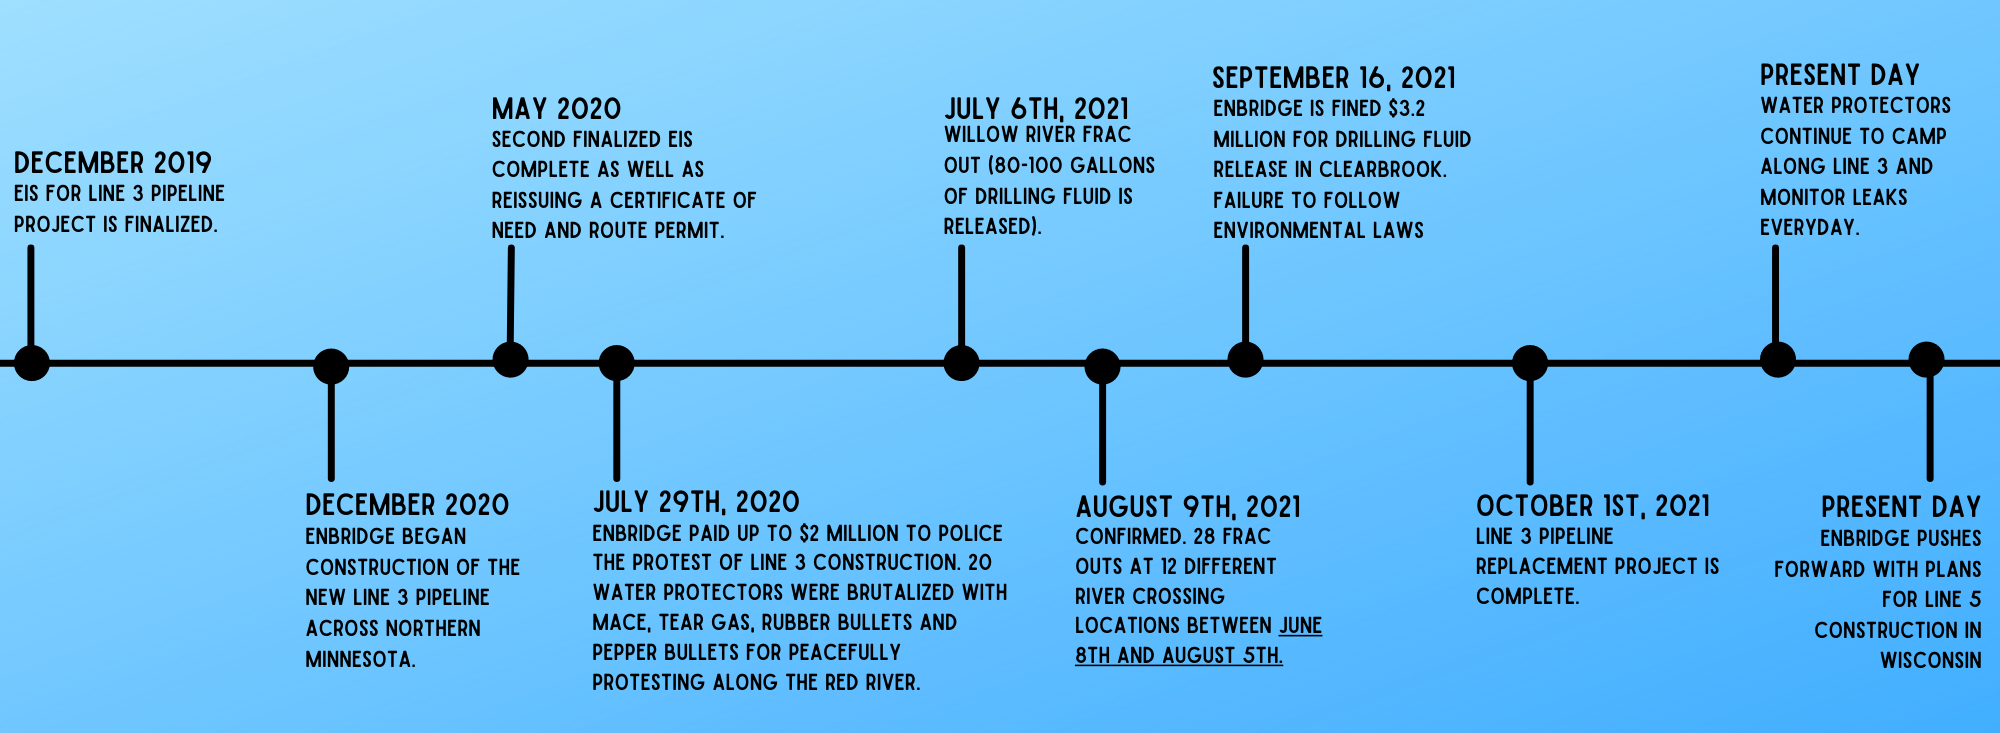 Graphic showing a timeline of Line 3 frac outs that occurred